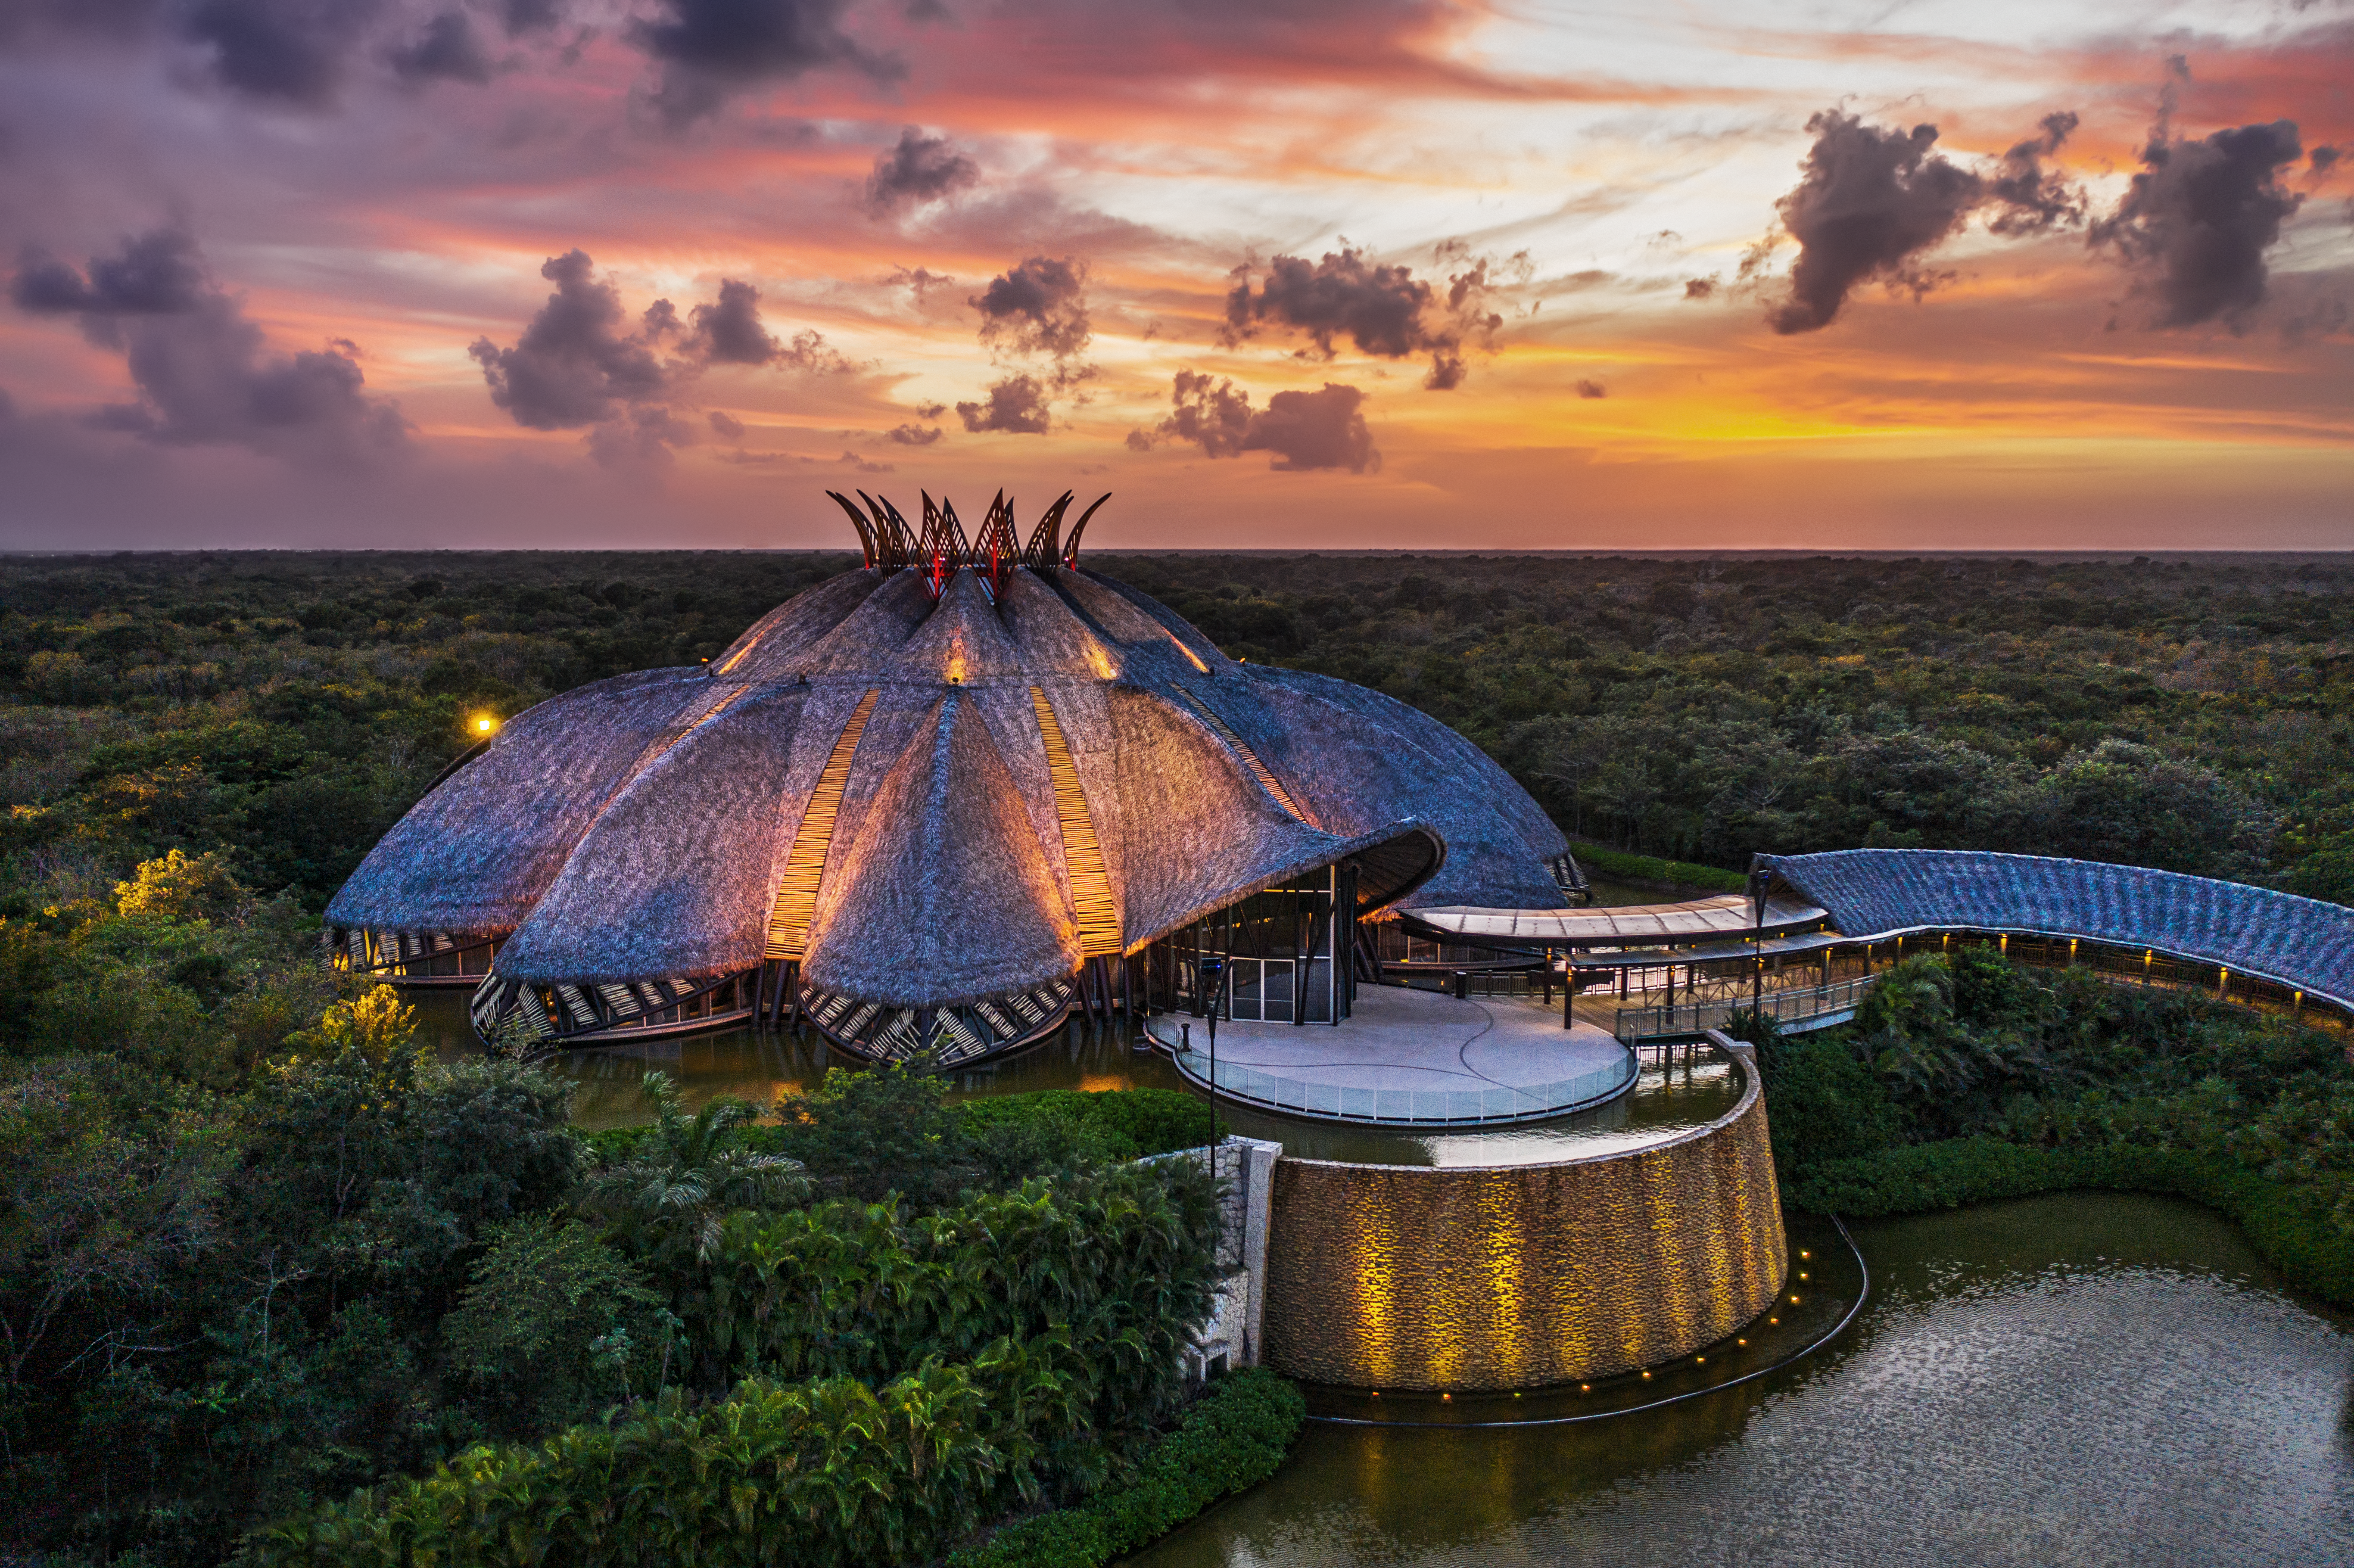 JOYÀ the first resident Cirque du Soleil show in Latin America will celebrate its 10th anniversary this November